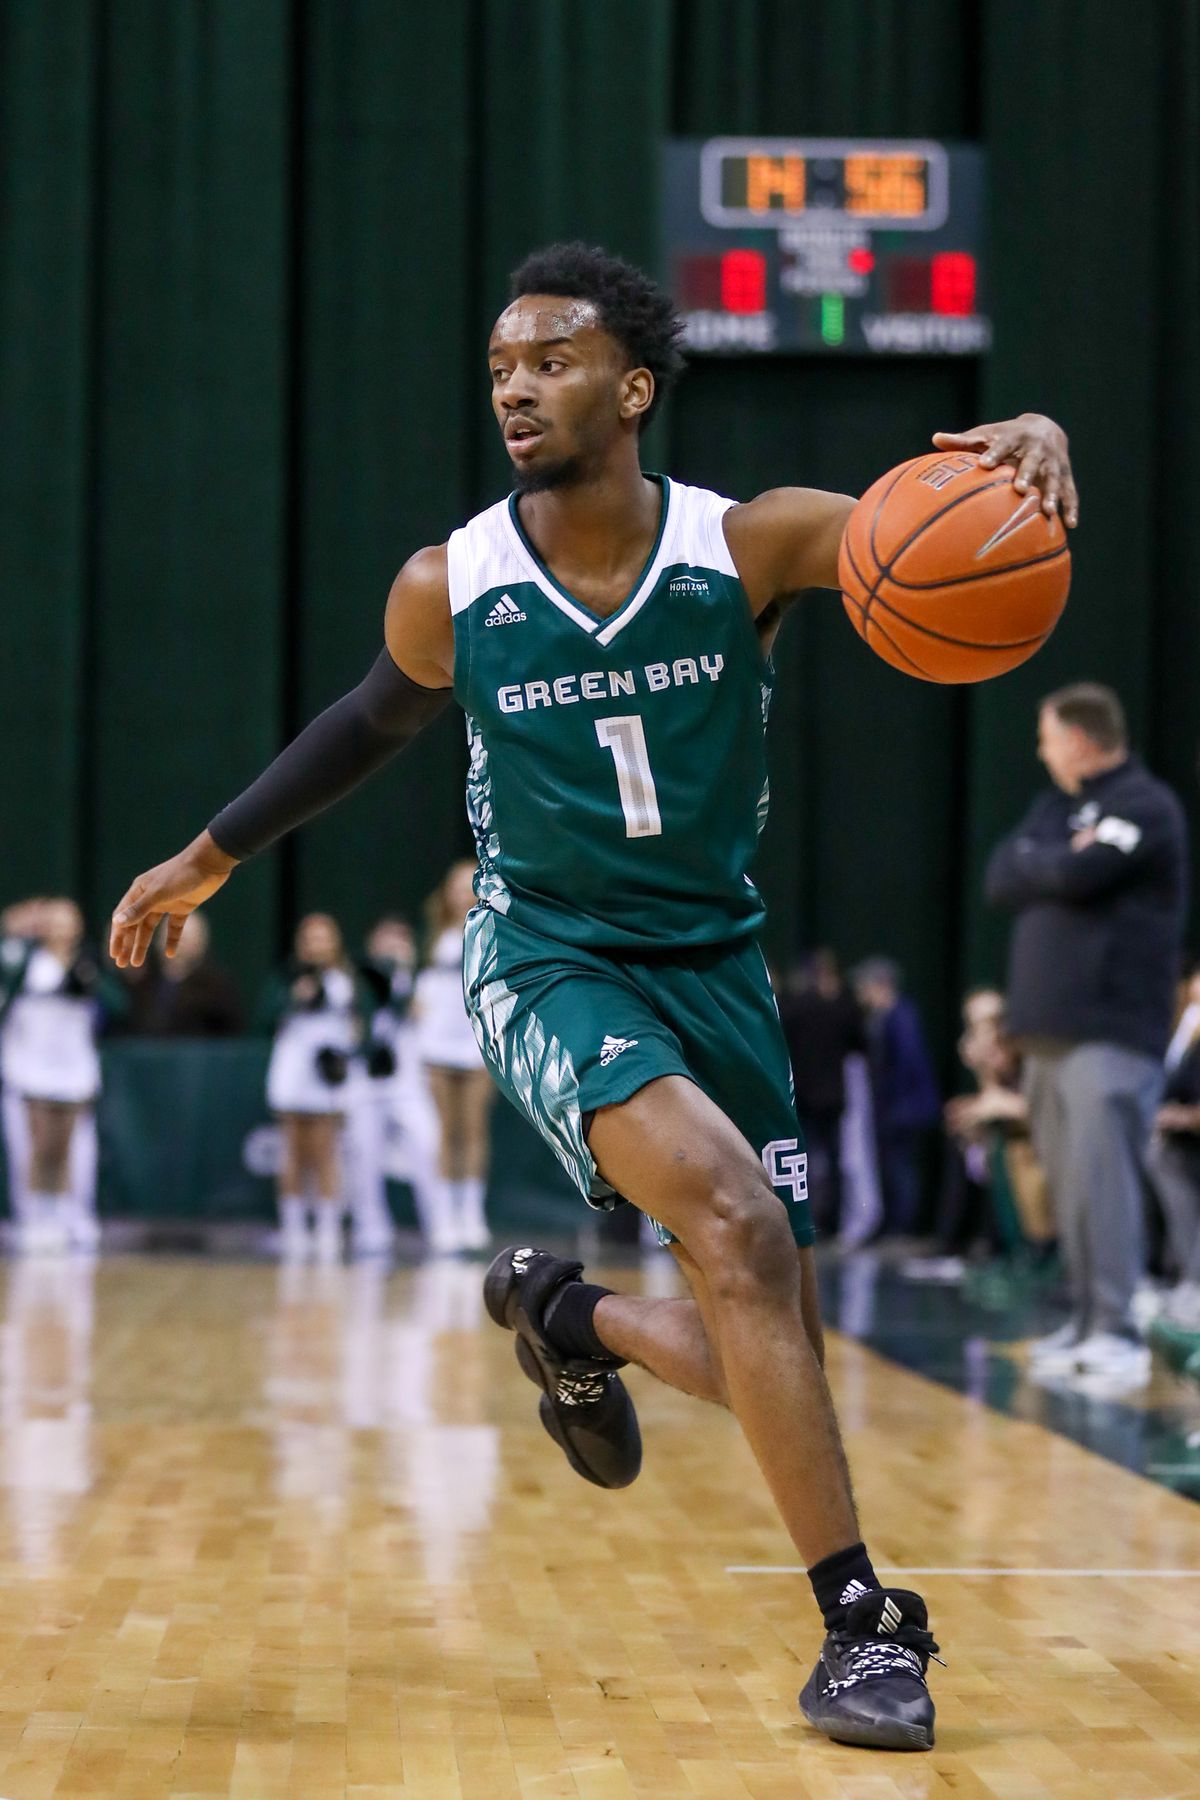 COLLEGE BASKETBALL: JAN 23 Green Bay at Cleveland State